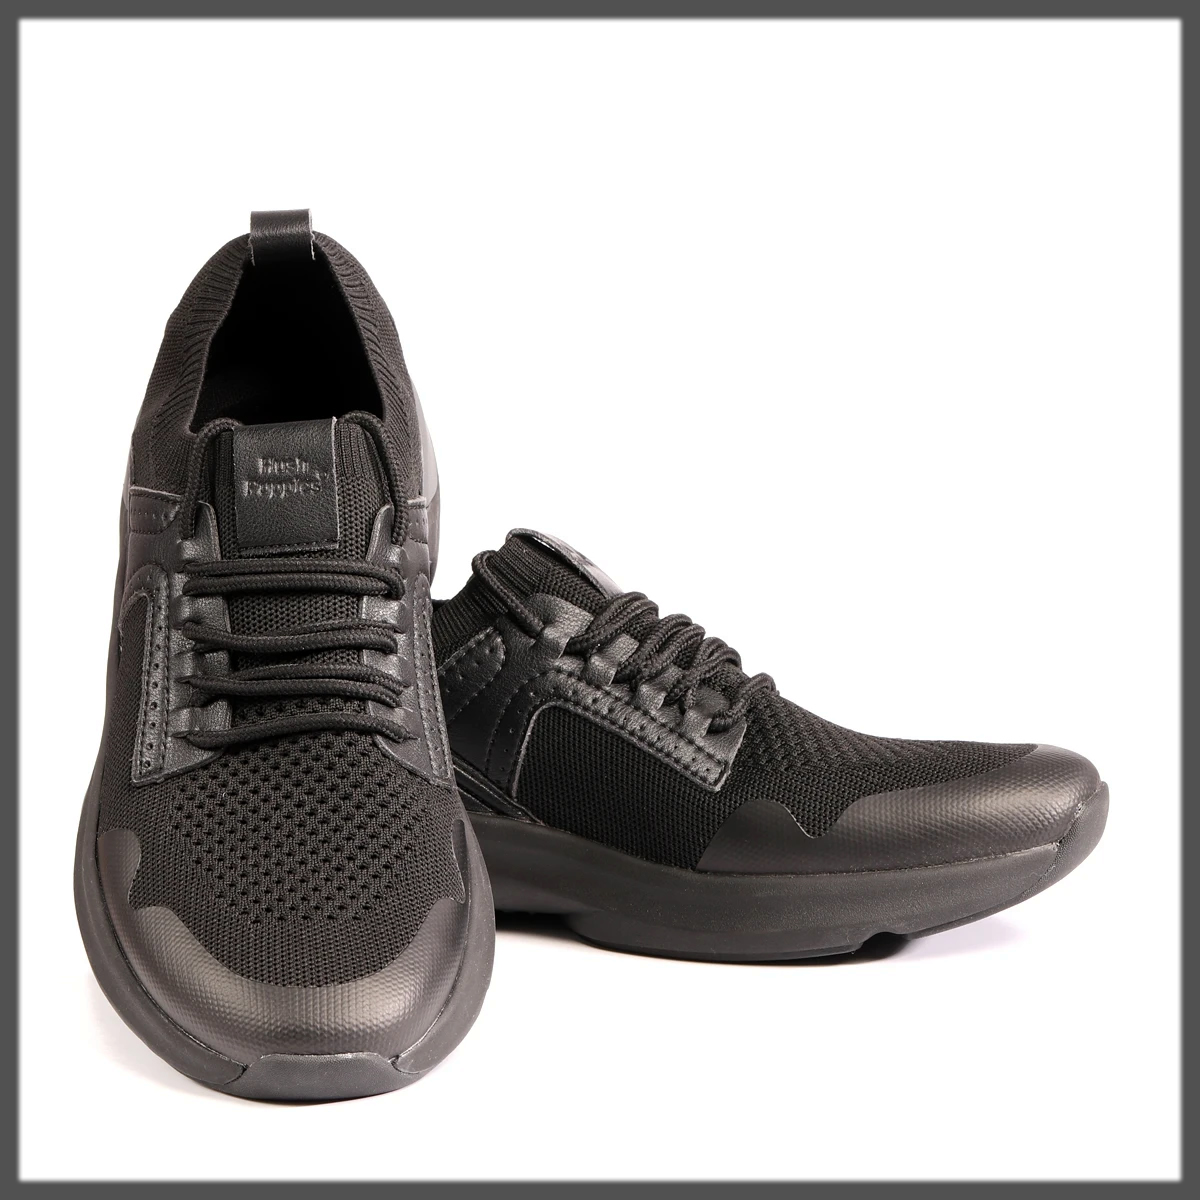 grey shaded Athleisure Shoes by Hush Puppies